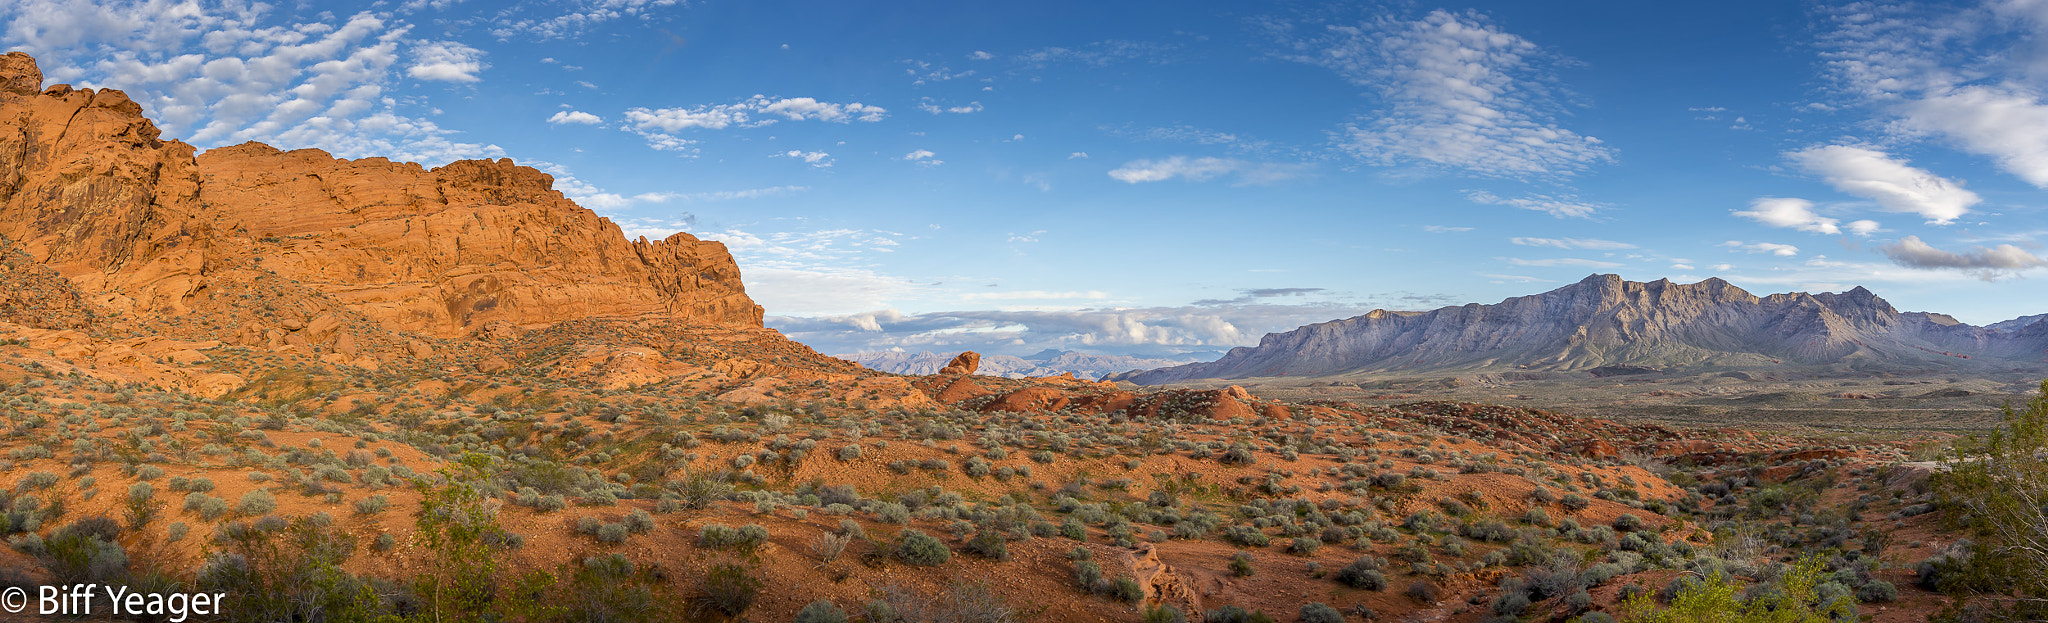 Nikon D7100 sample photo. Valley of fire pano photography